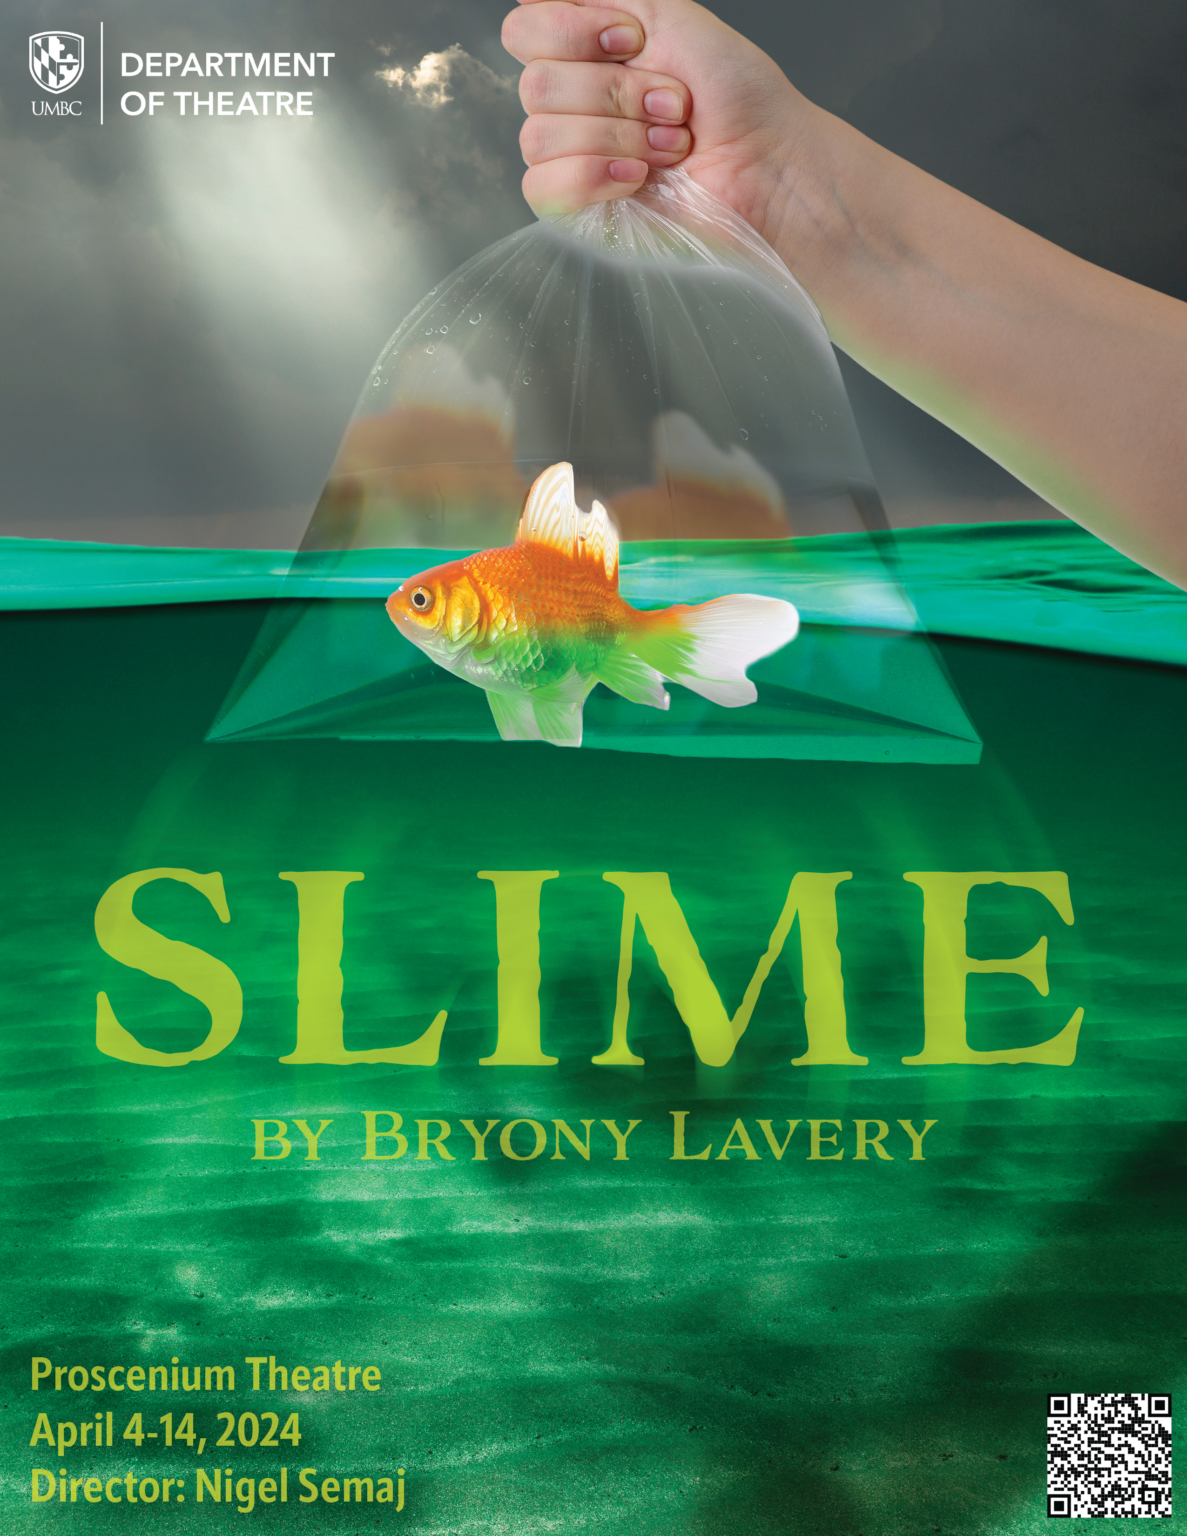 A promotional poster says Slime by Byron Lavery